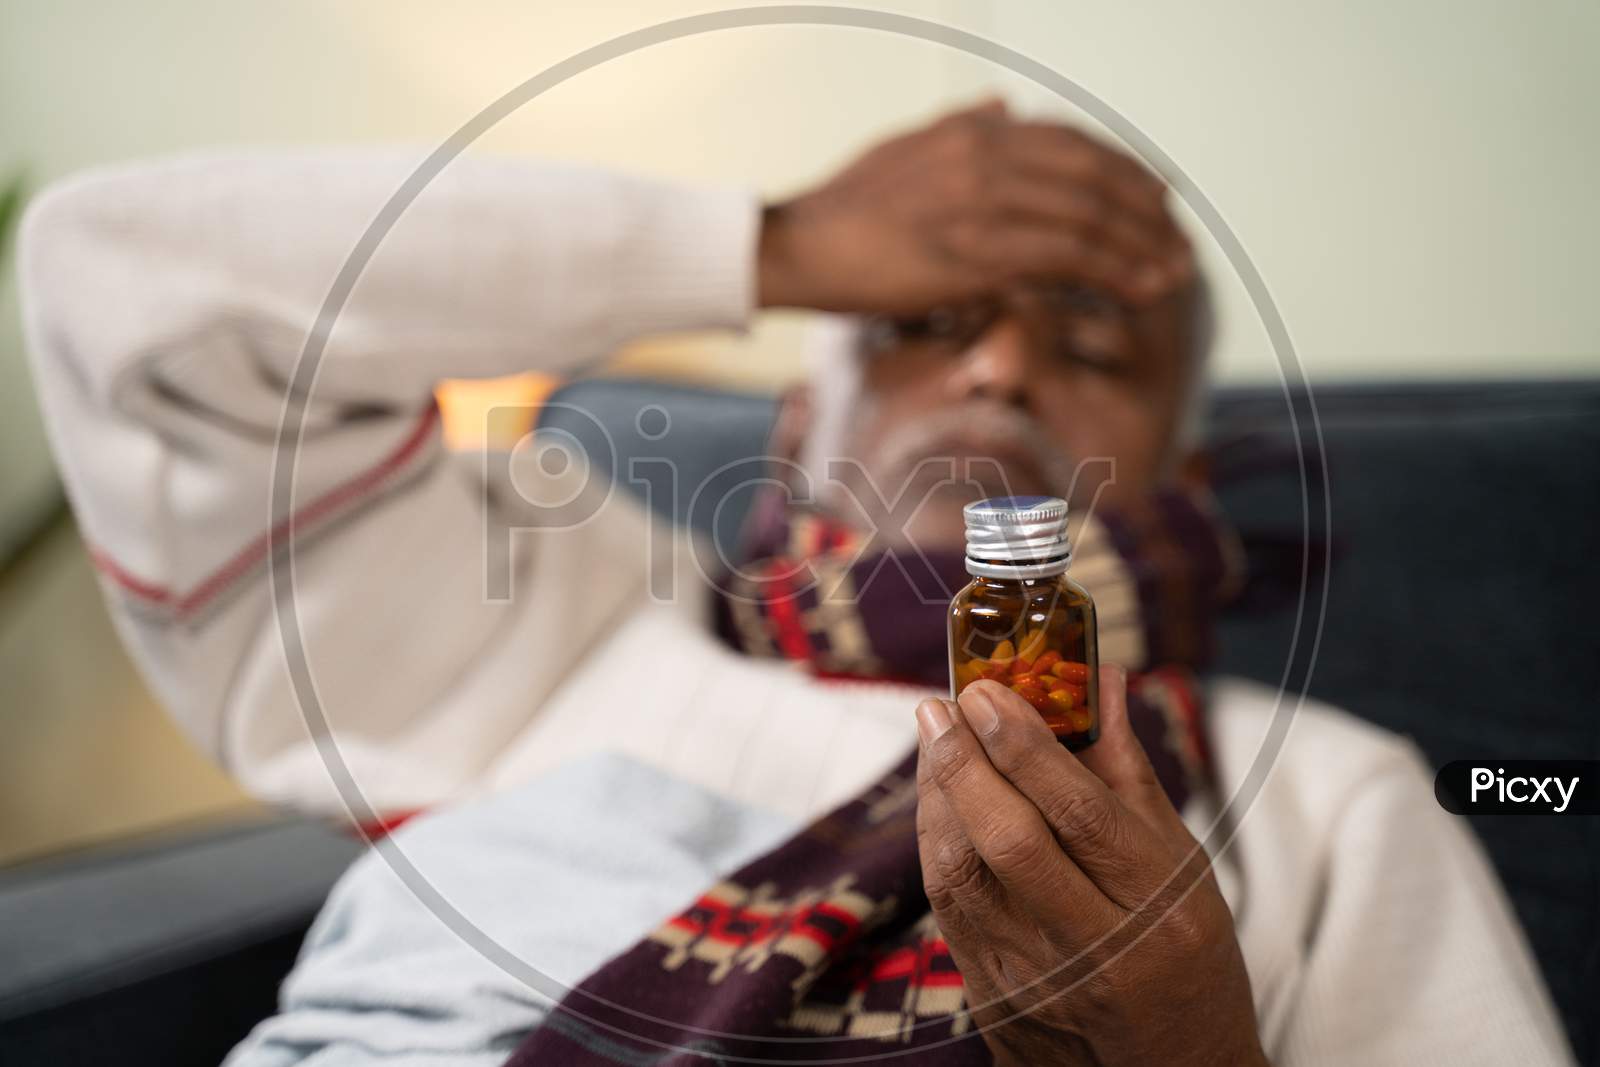 Selective focus on tablet or pills bottle, sick Old man worried about taking pills by placing hand on his head